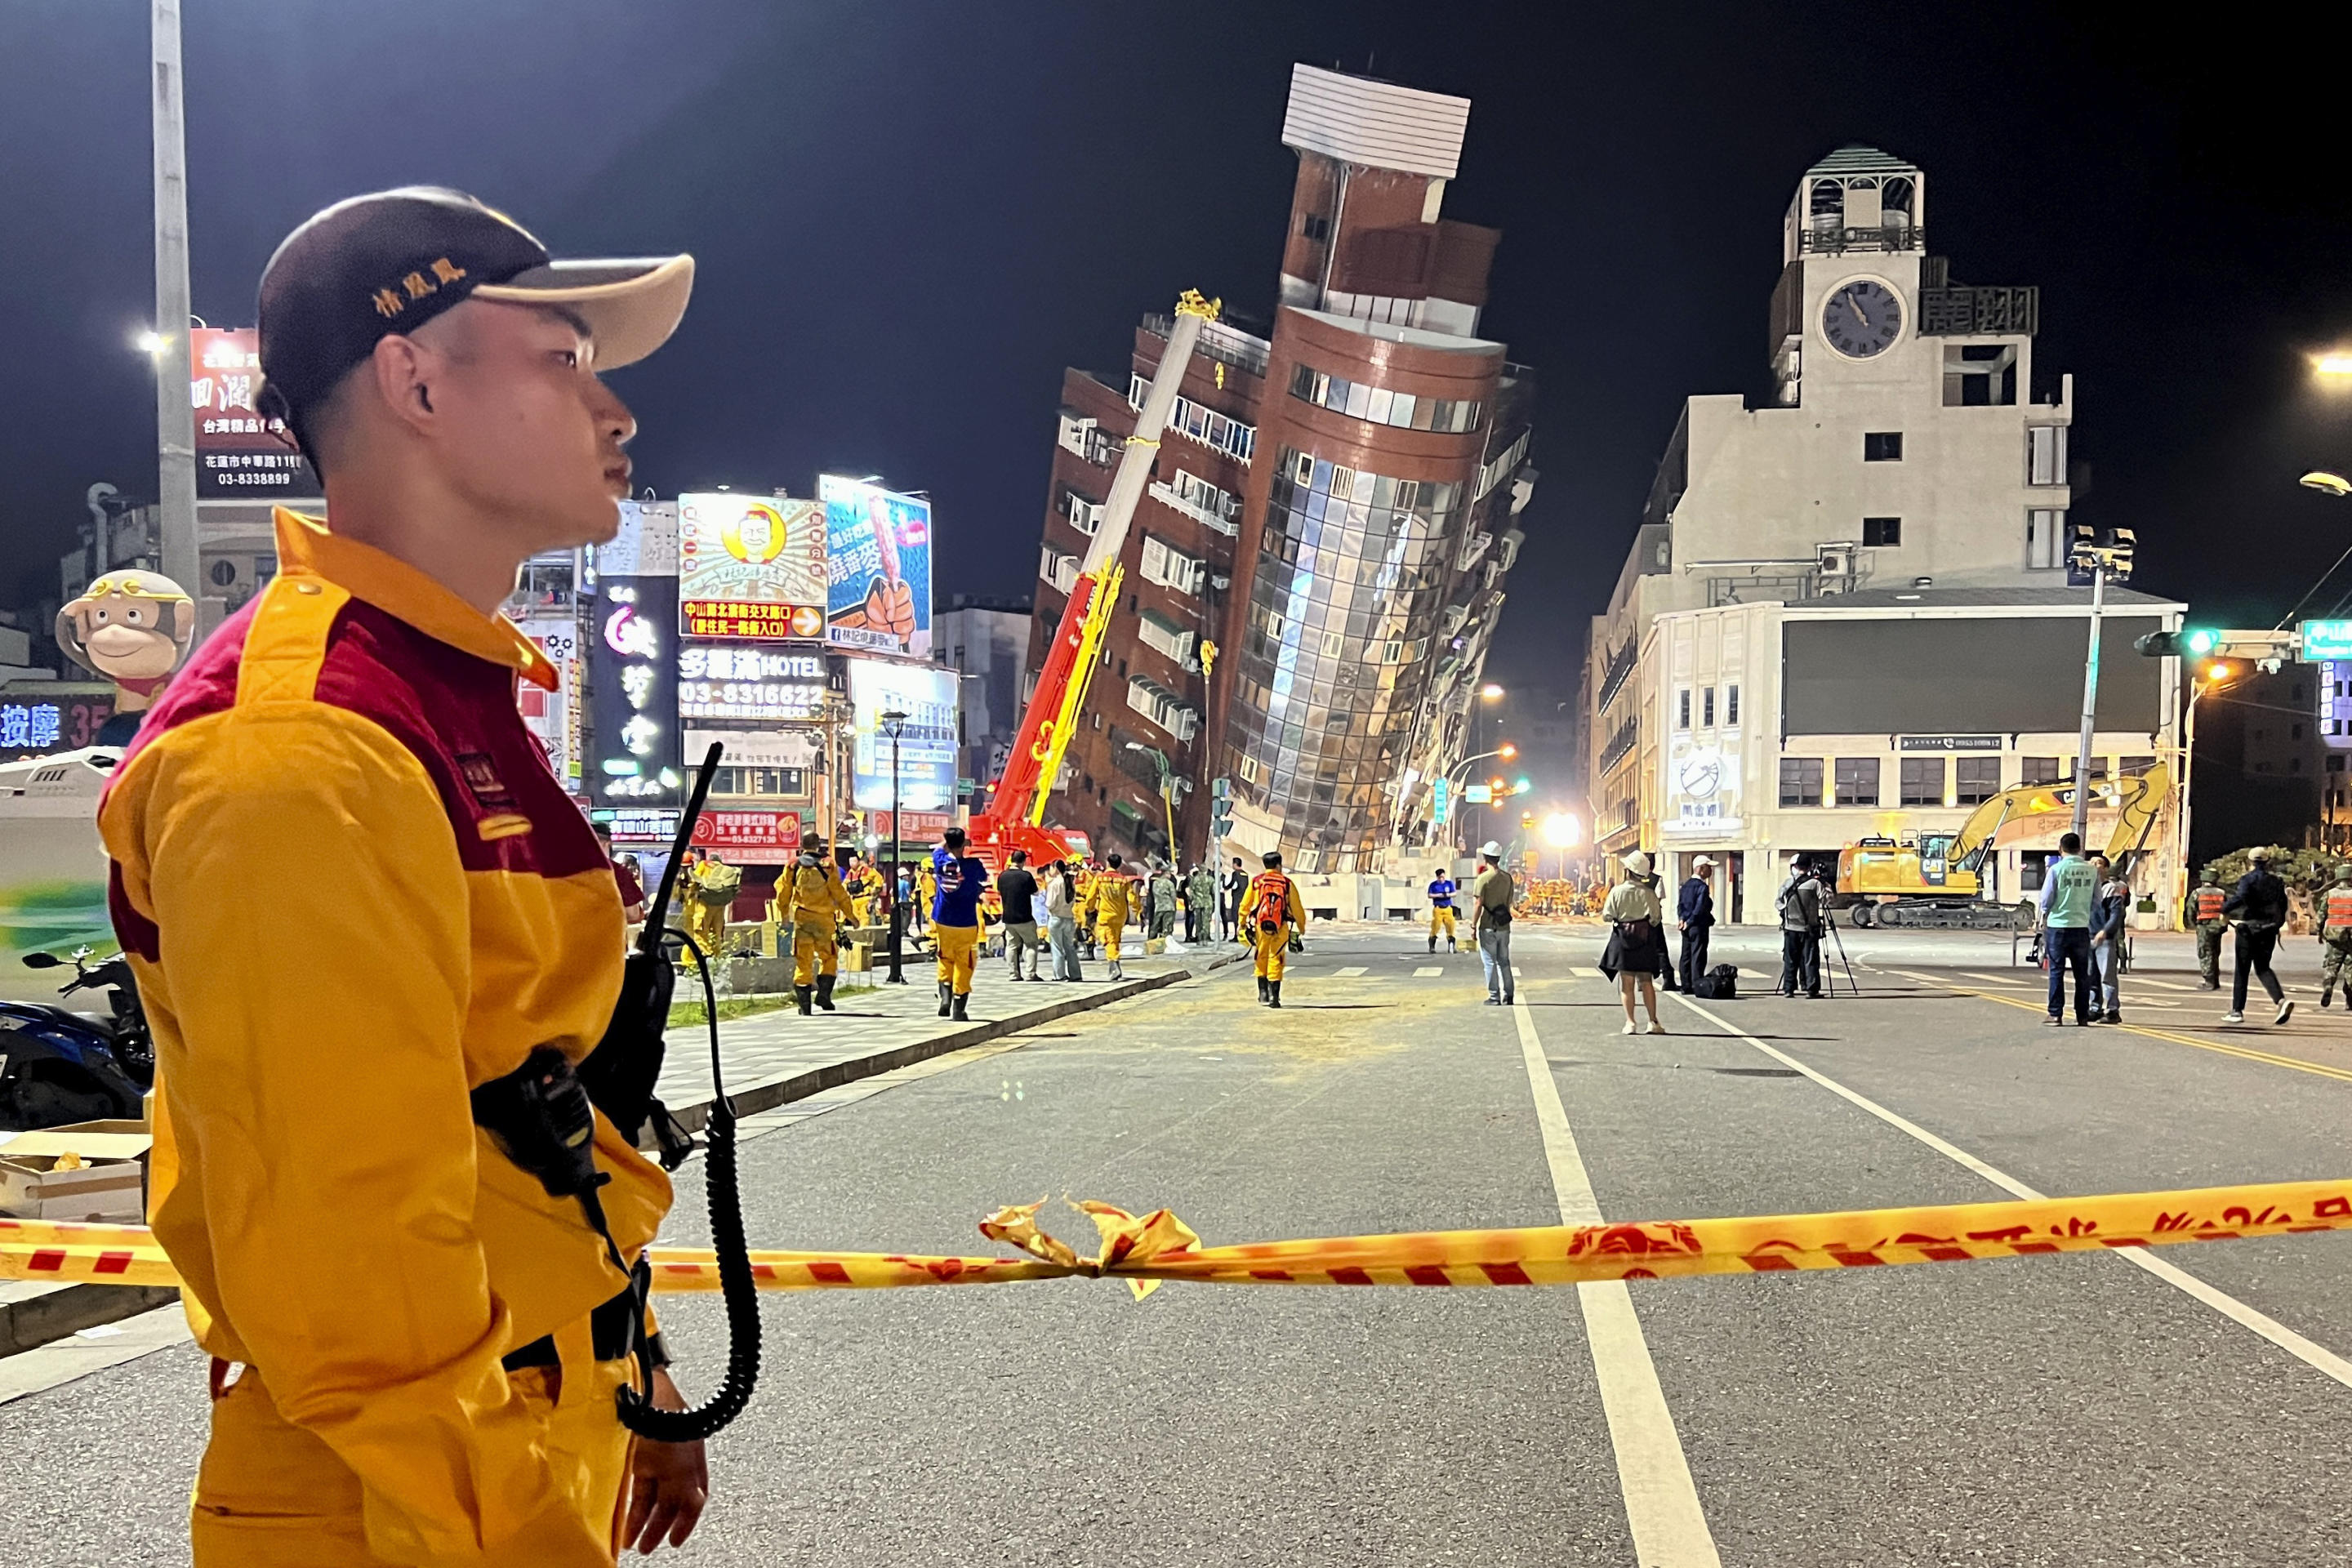 A rescue worker stands near the cordoned off site of a leaning building in the aftermath of the earthquake in Hualien City.